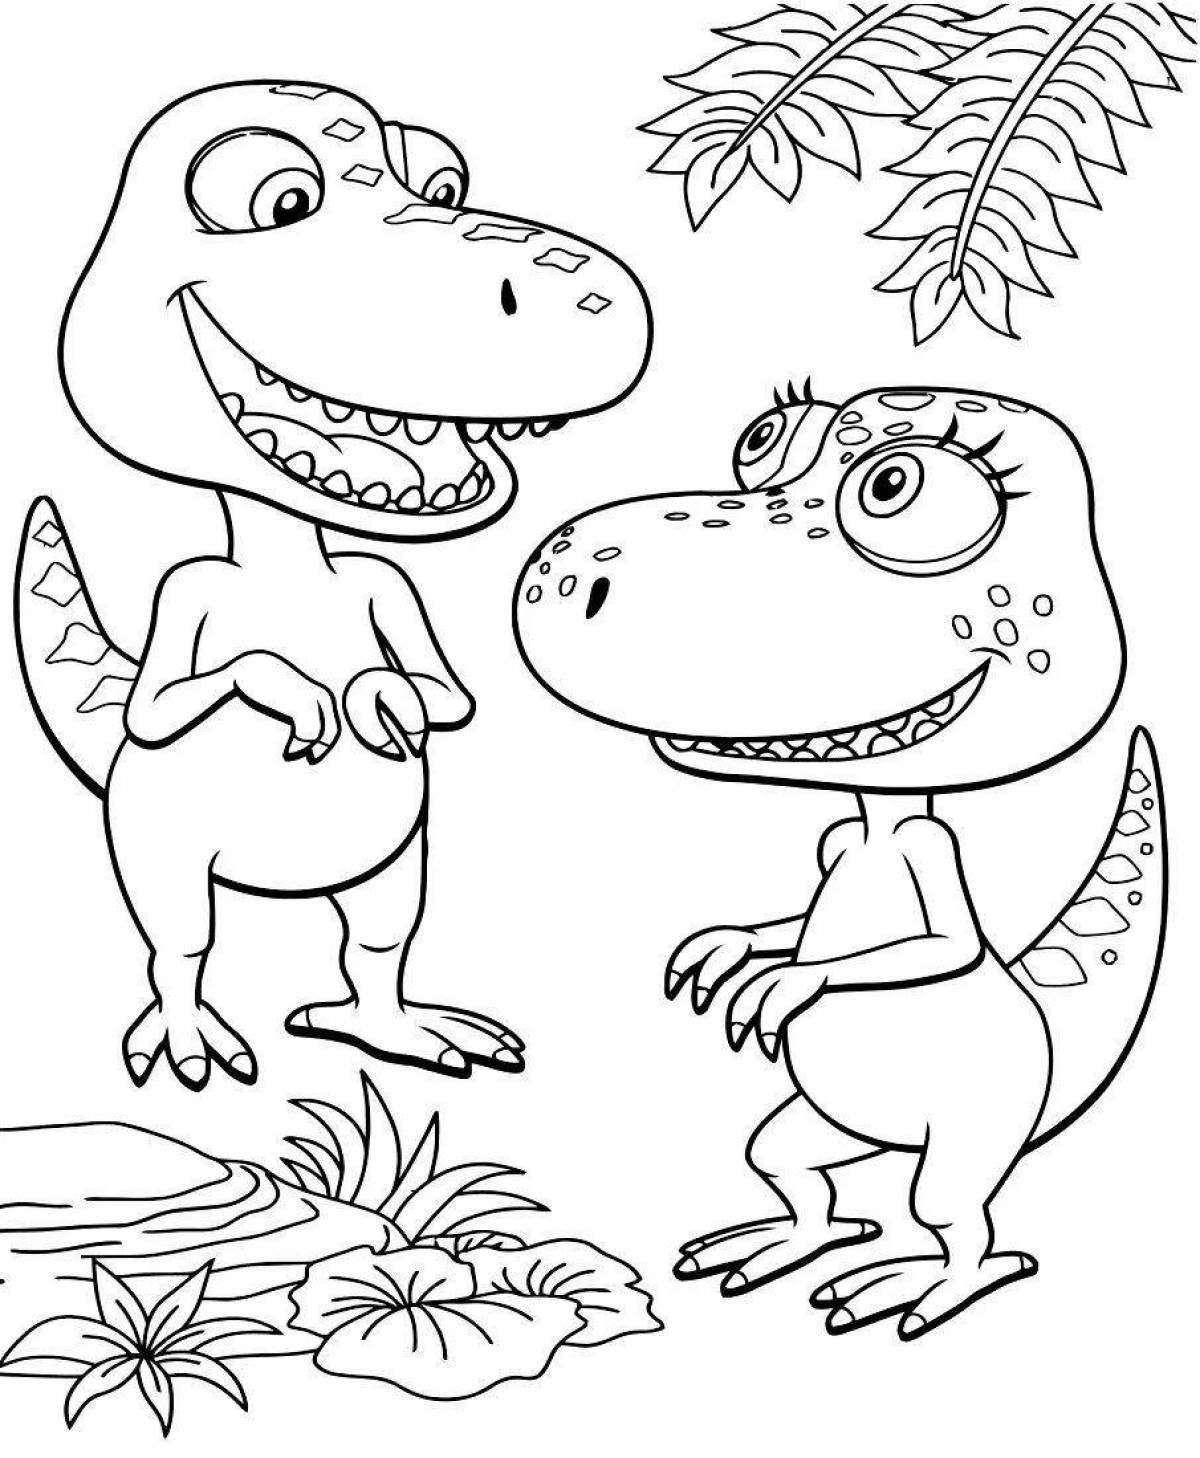 Dinosaur coloring book for kids